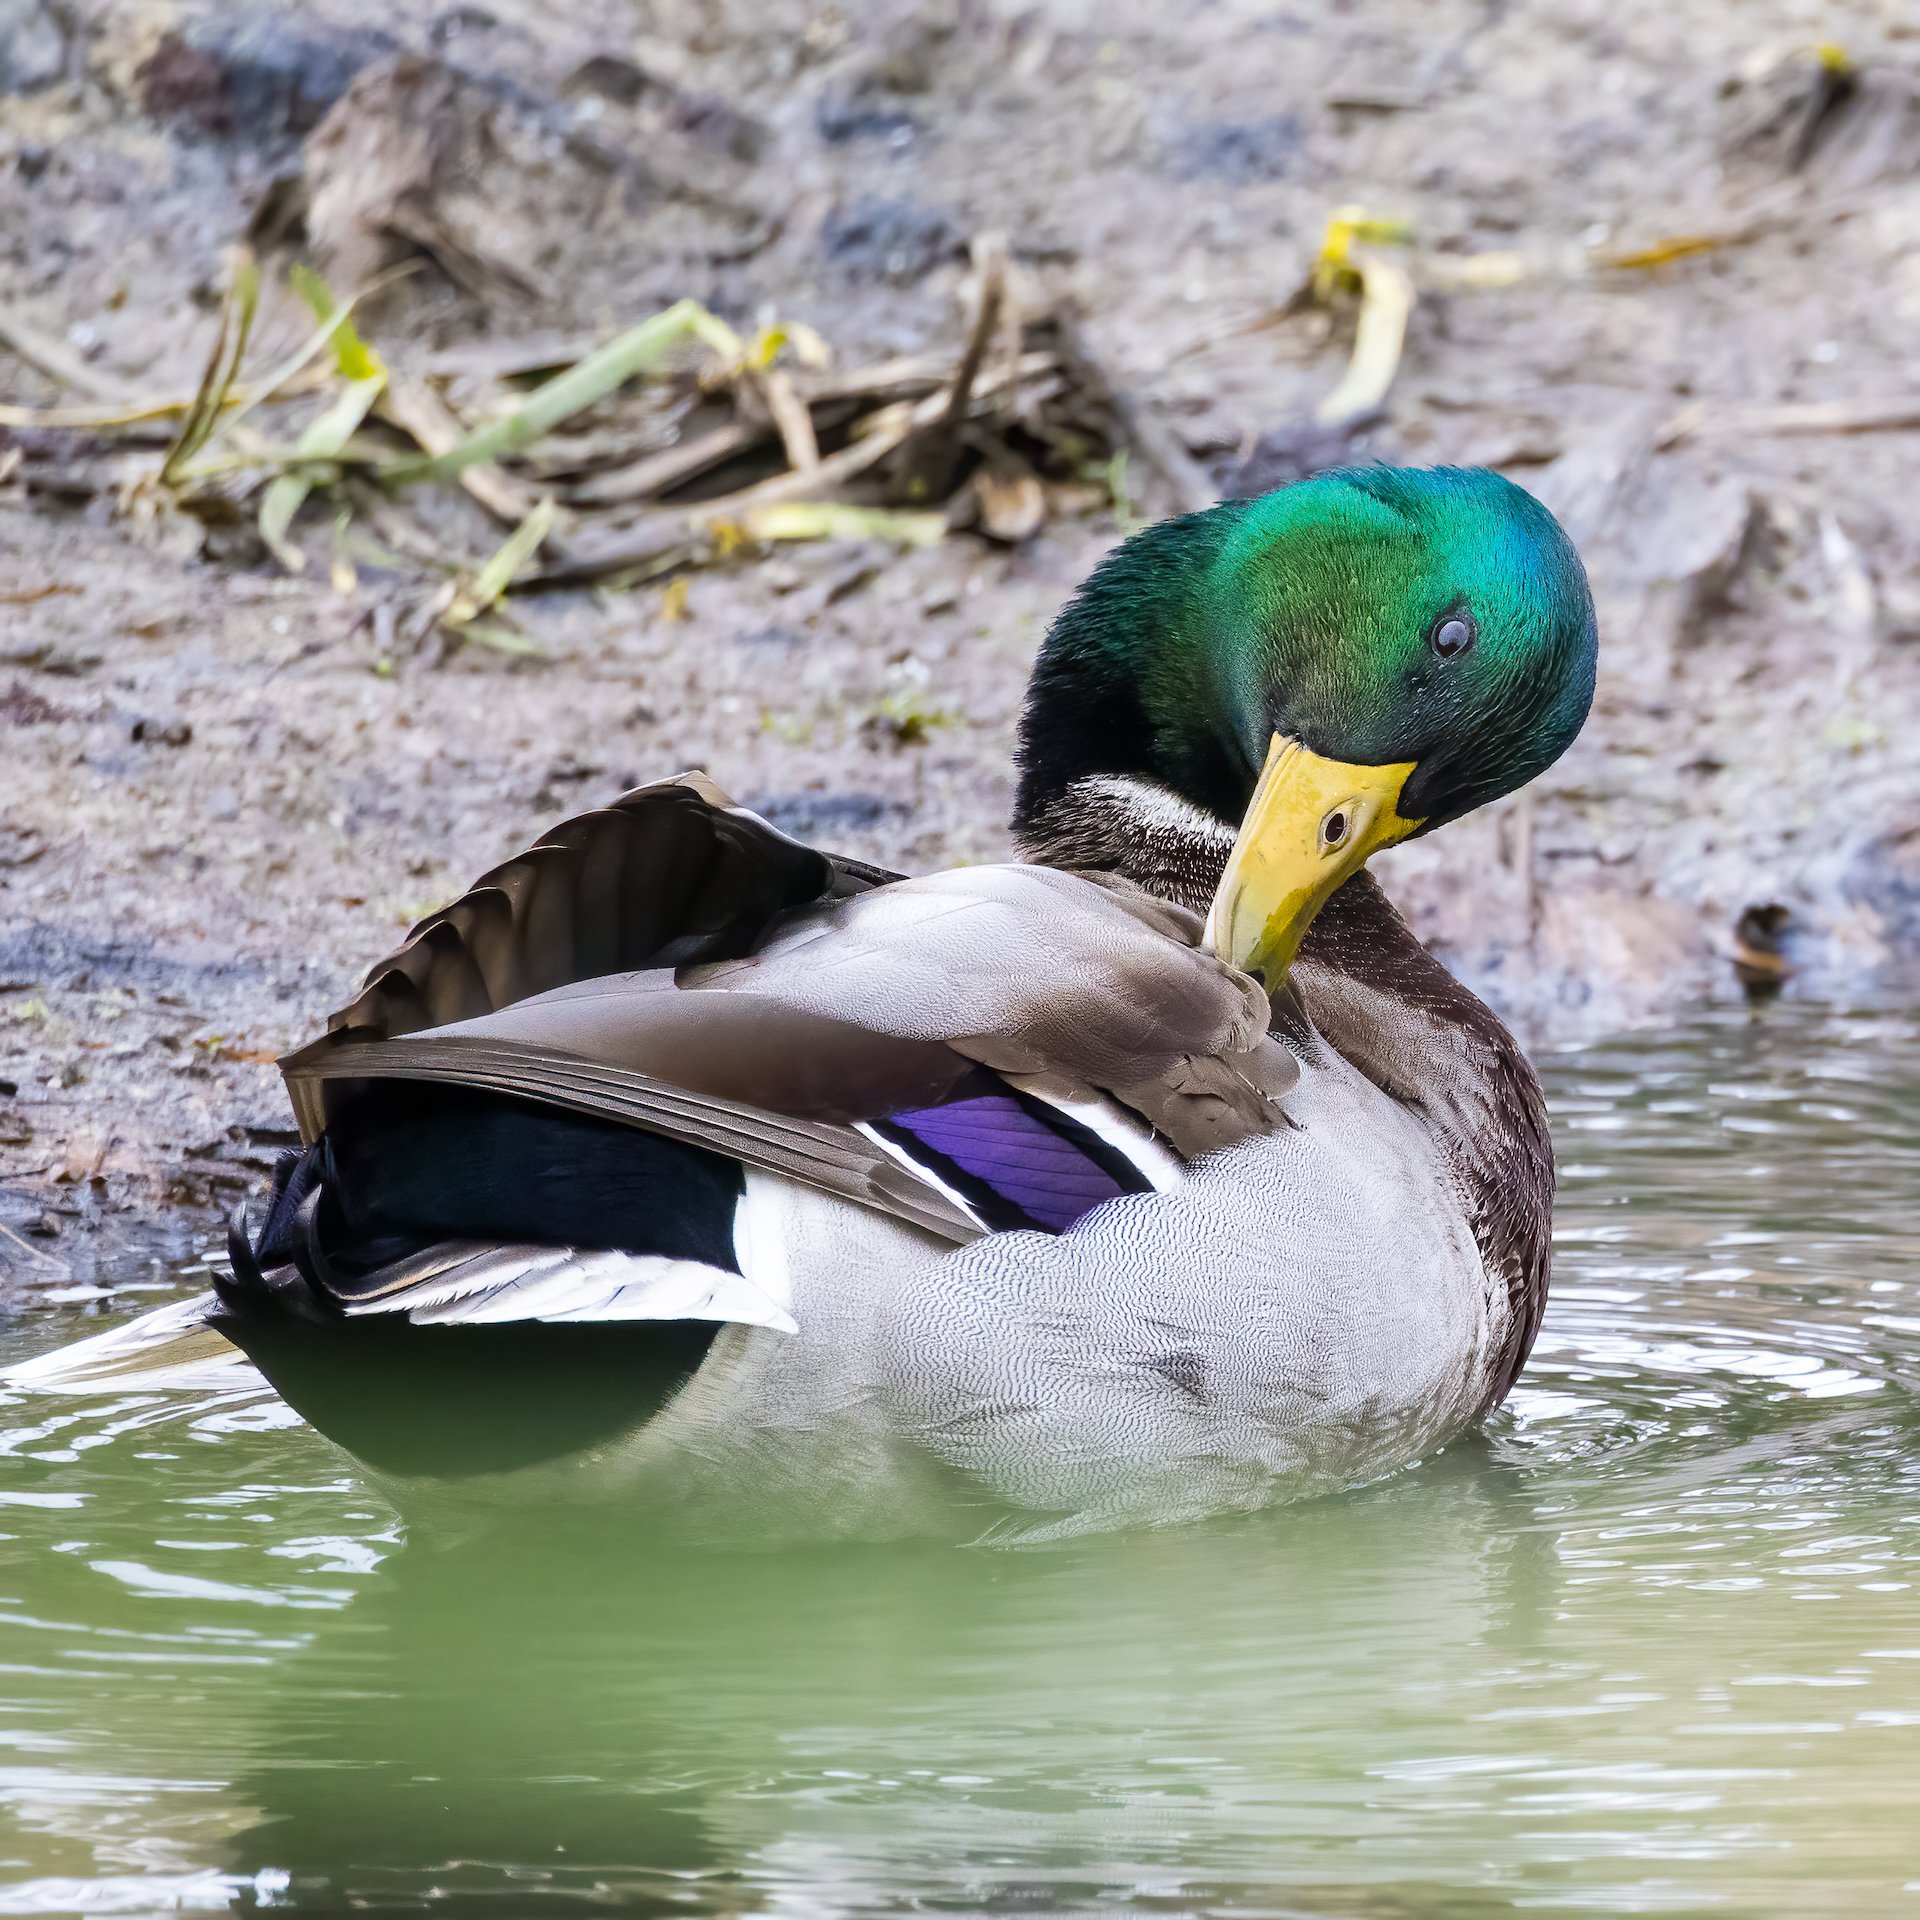  Yes, it’s just a mallard, but they are still quite beautiful.  